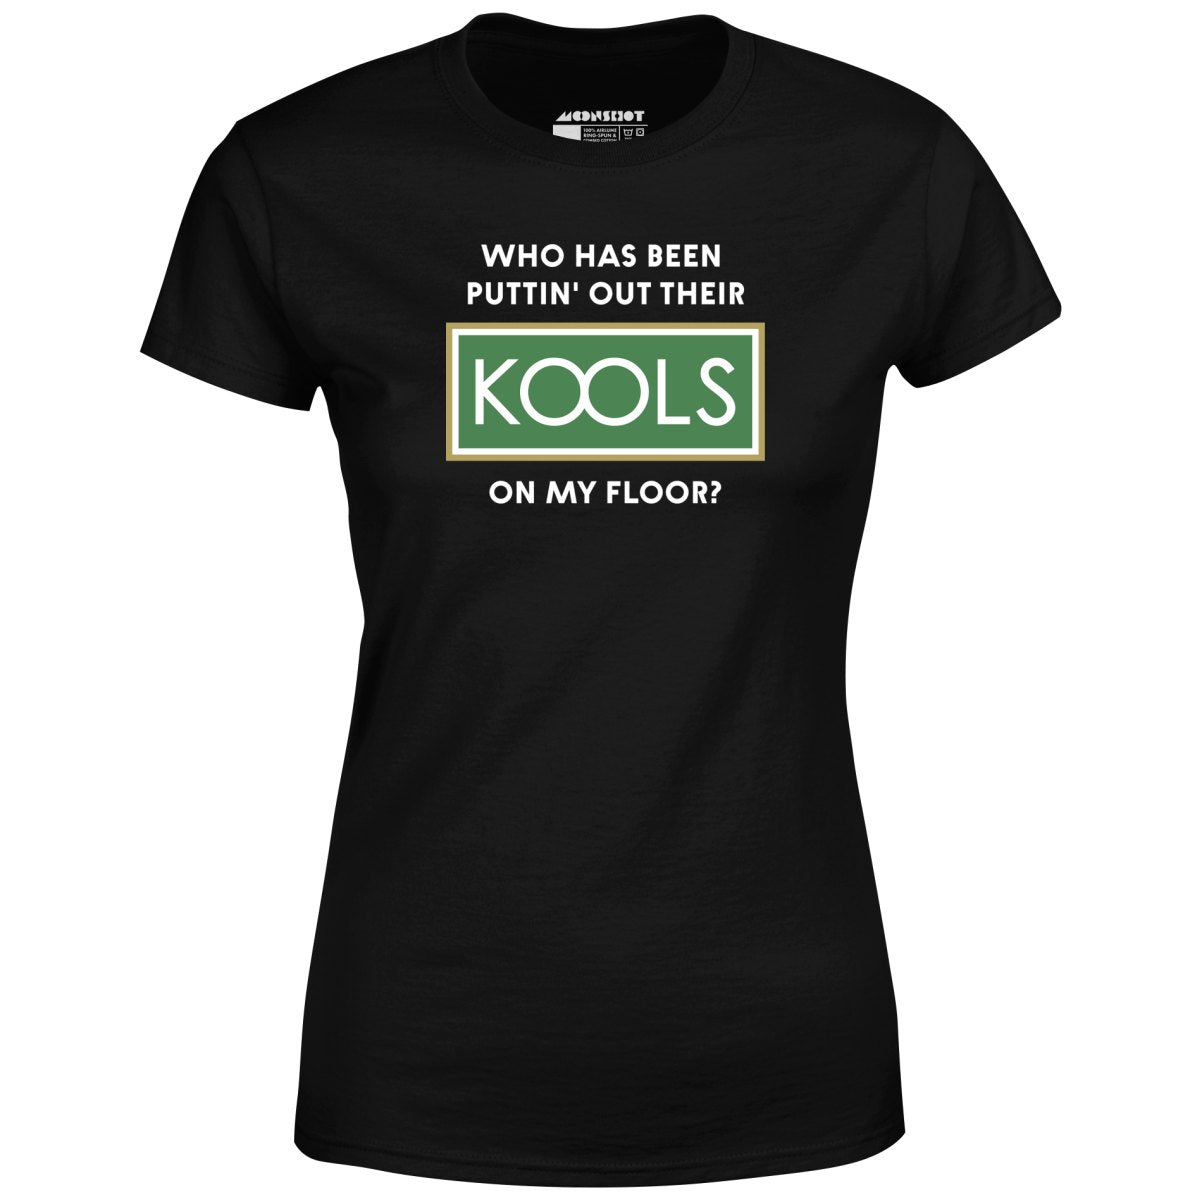 Who Has Been Puttin' Out Their Kools On My Floor? - Women's T-Shirt